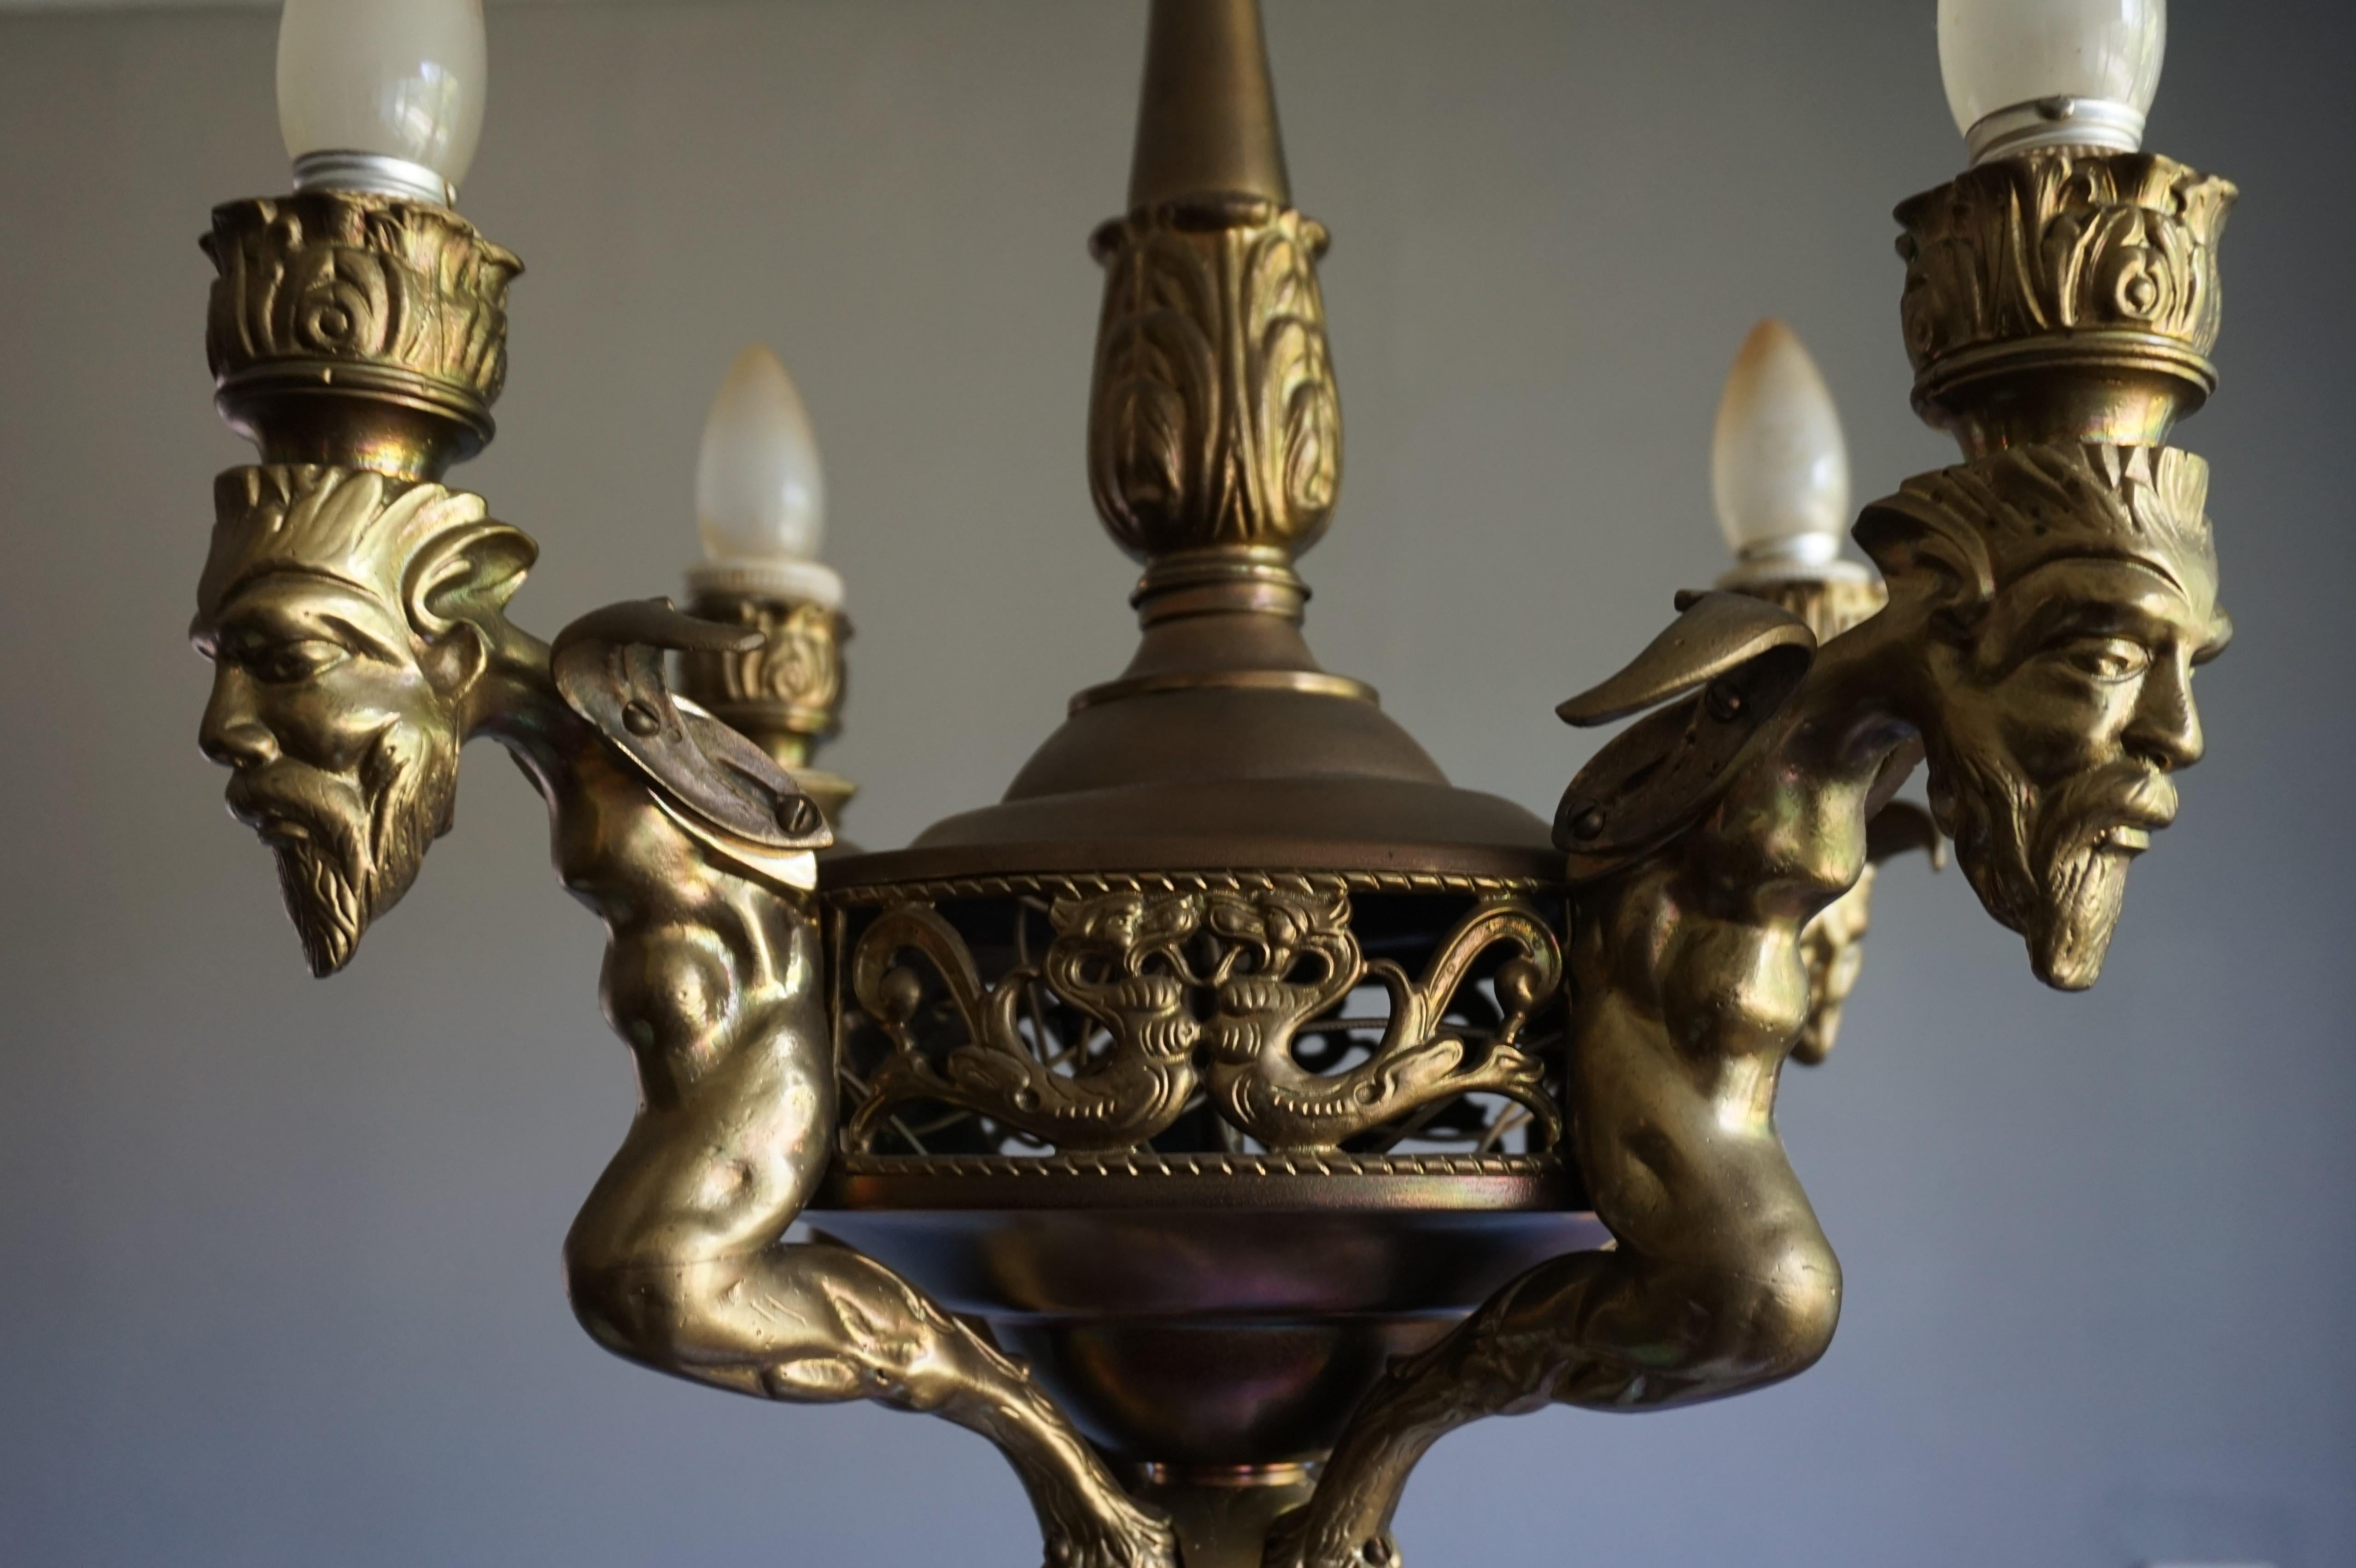 French Antique Gilt Bronze & Brass Gothic Revival Pendant Light with Chimera Sculptures